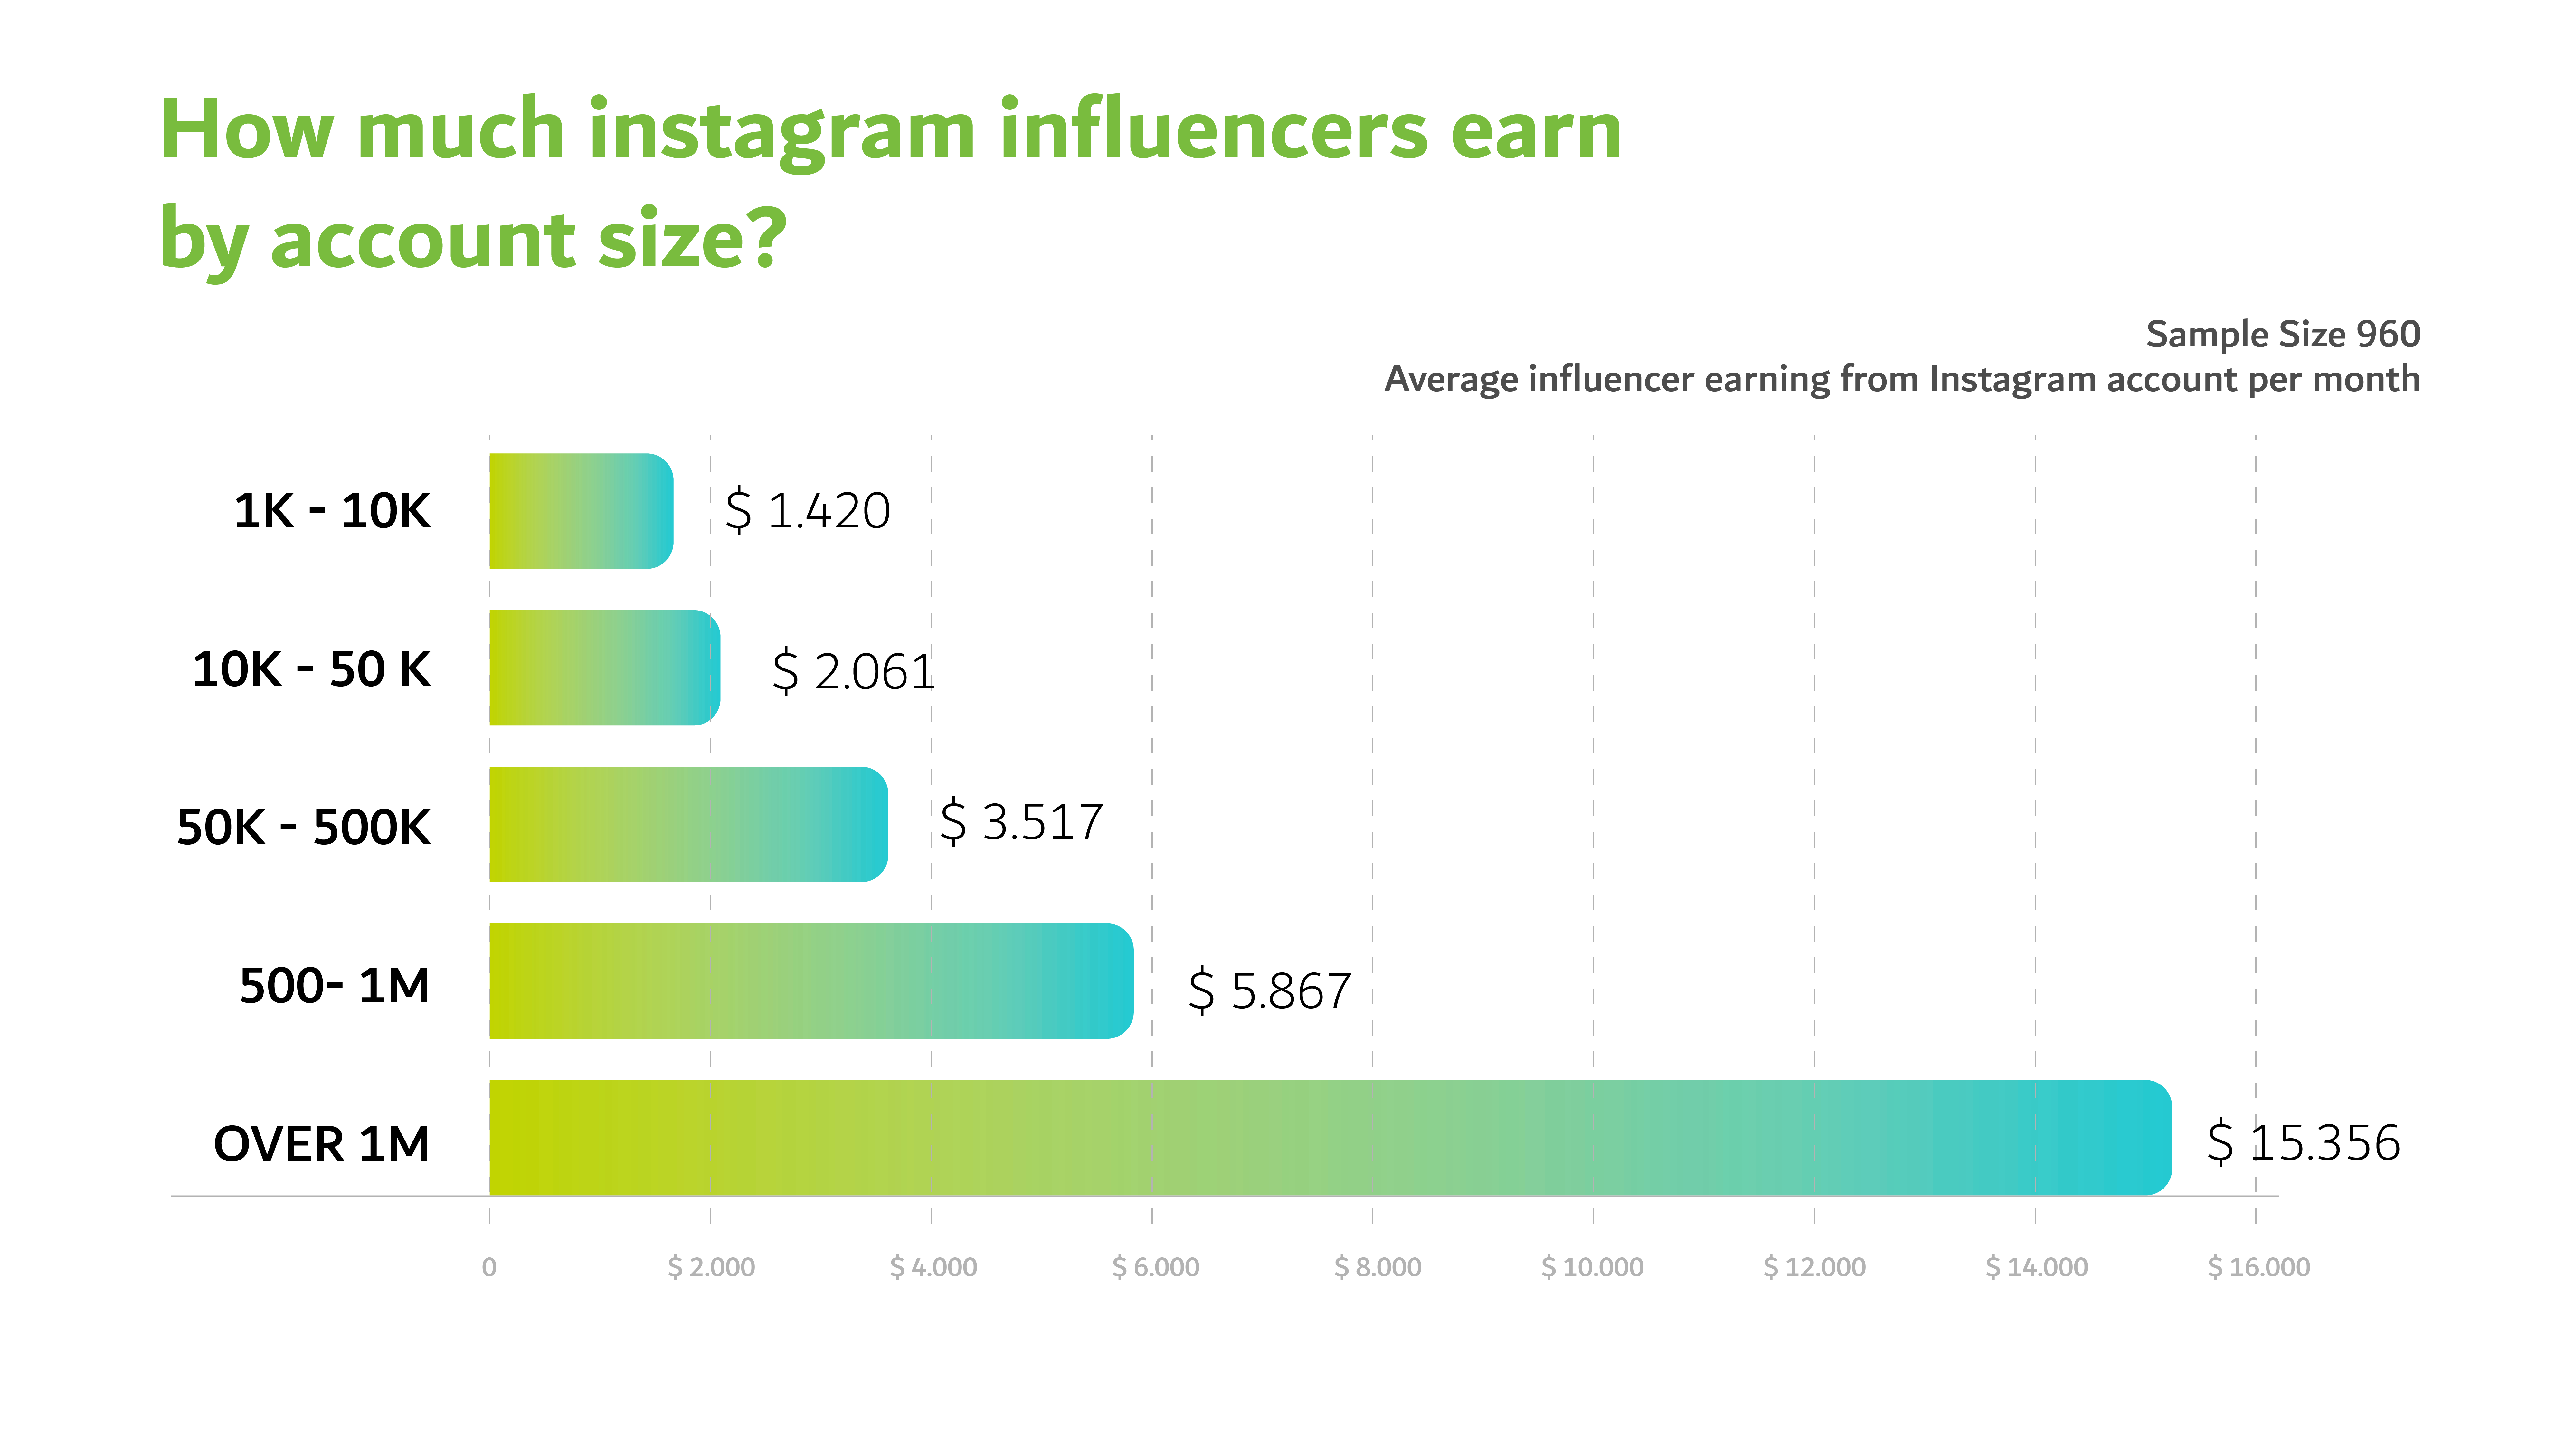 Instagram influencers earn by account size